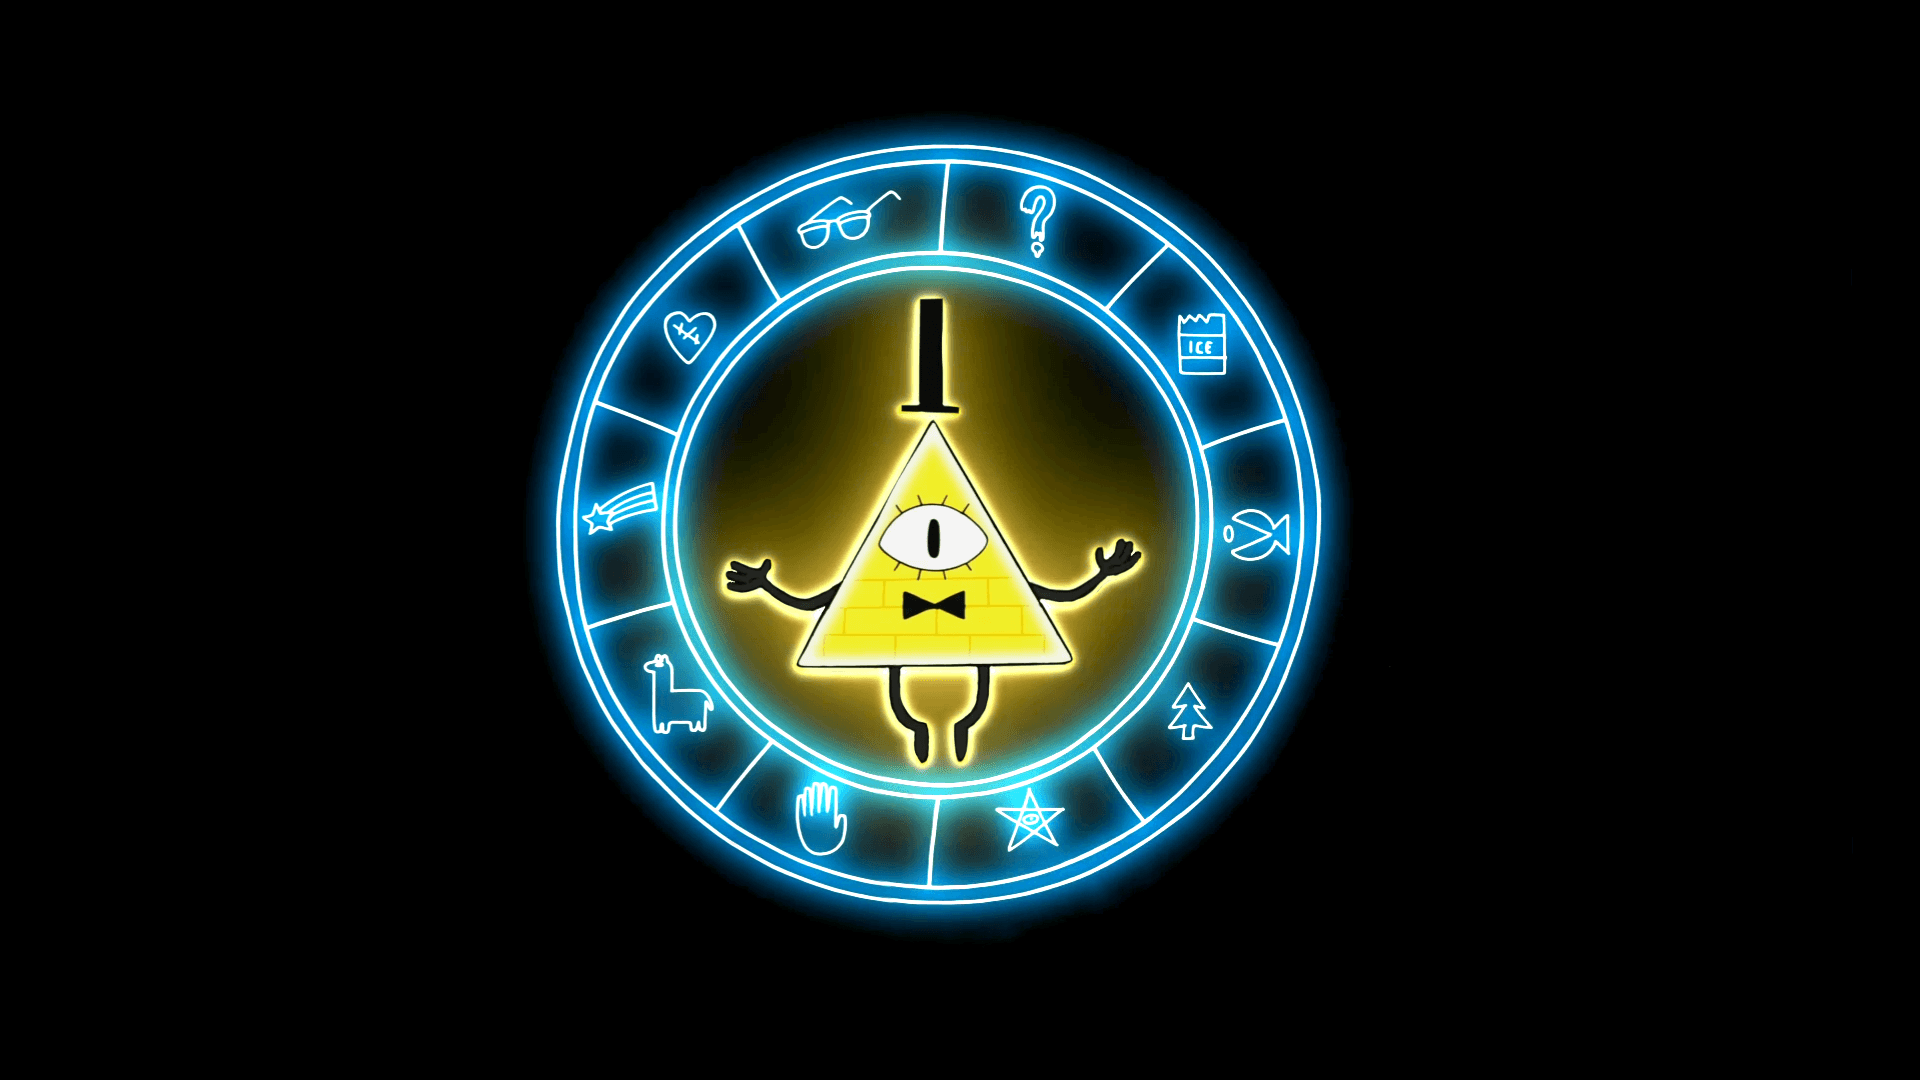 Cipher pictures bill Bill Cipher